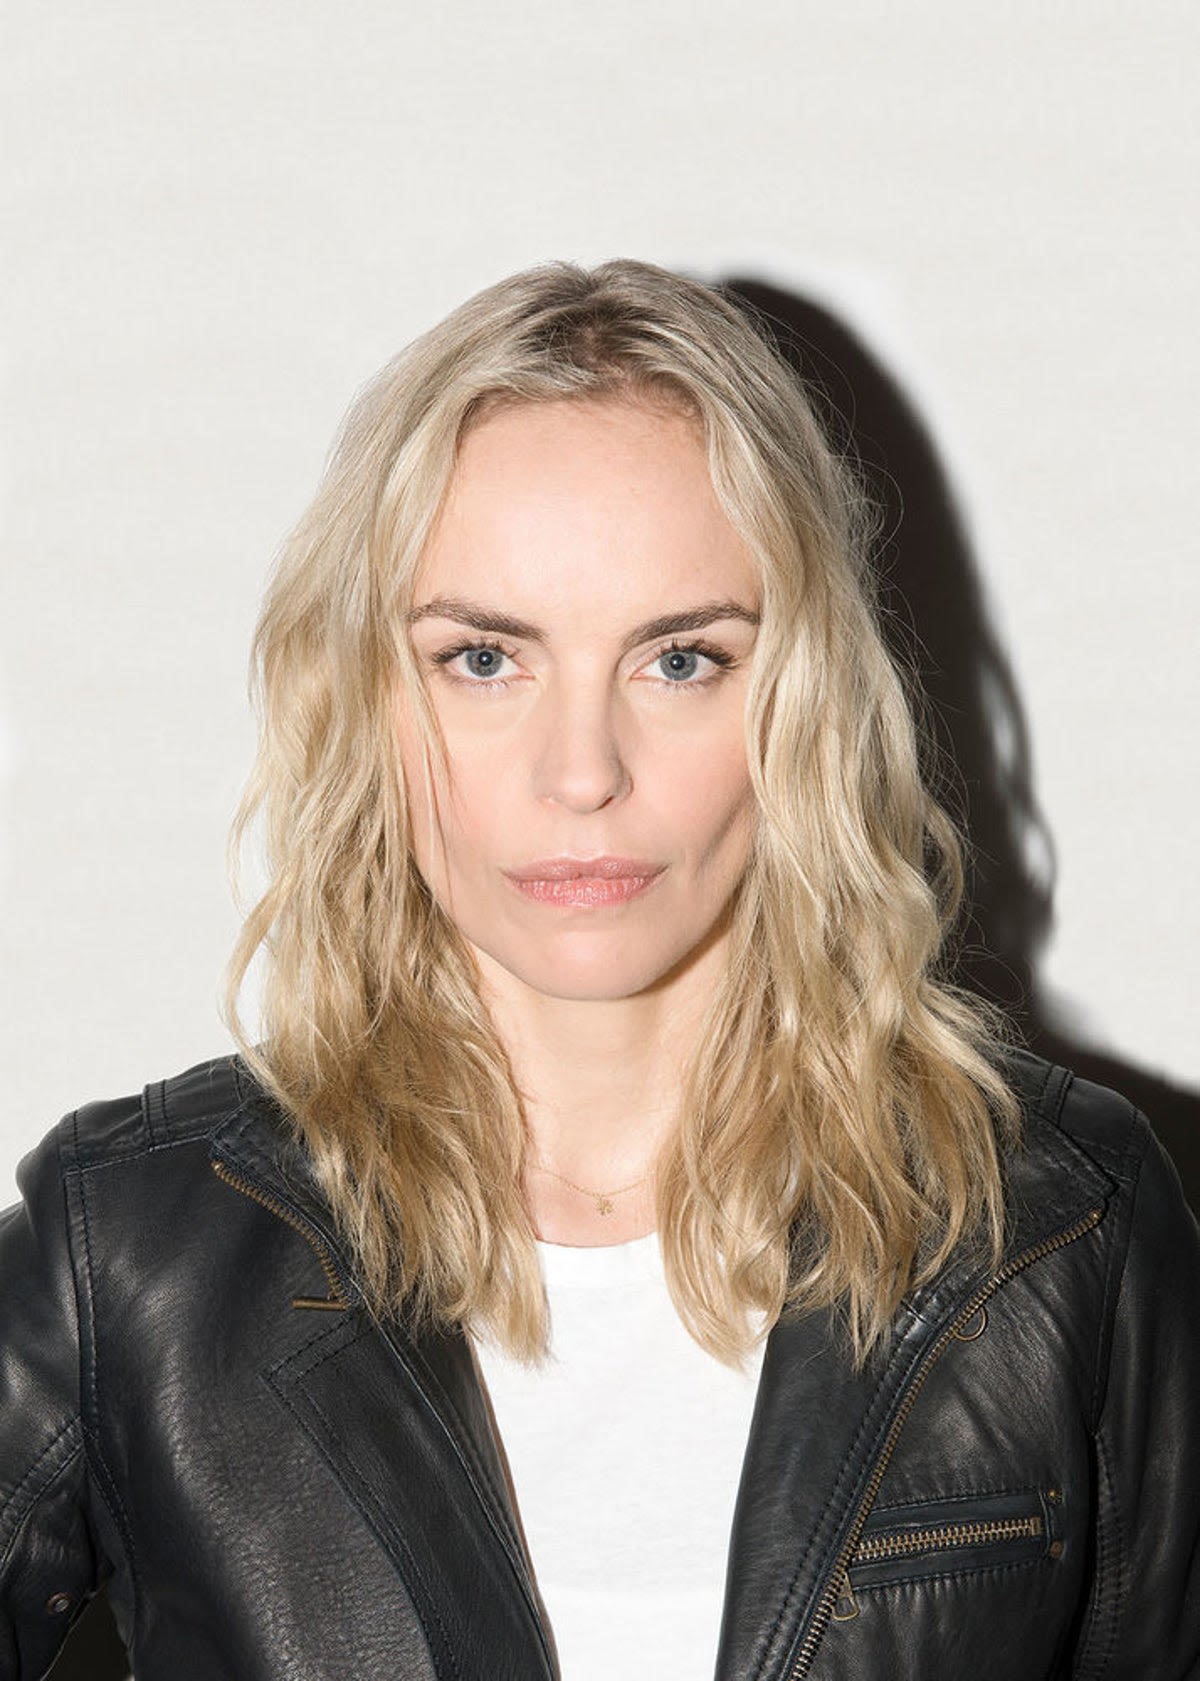 Tár's Nina Hoss on making her stage debut in London: 'We Germans can't compete with British humour'